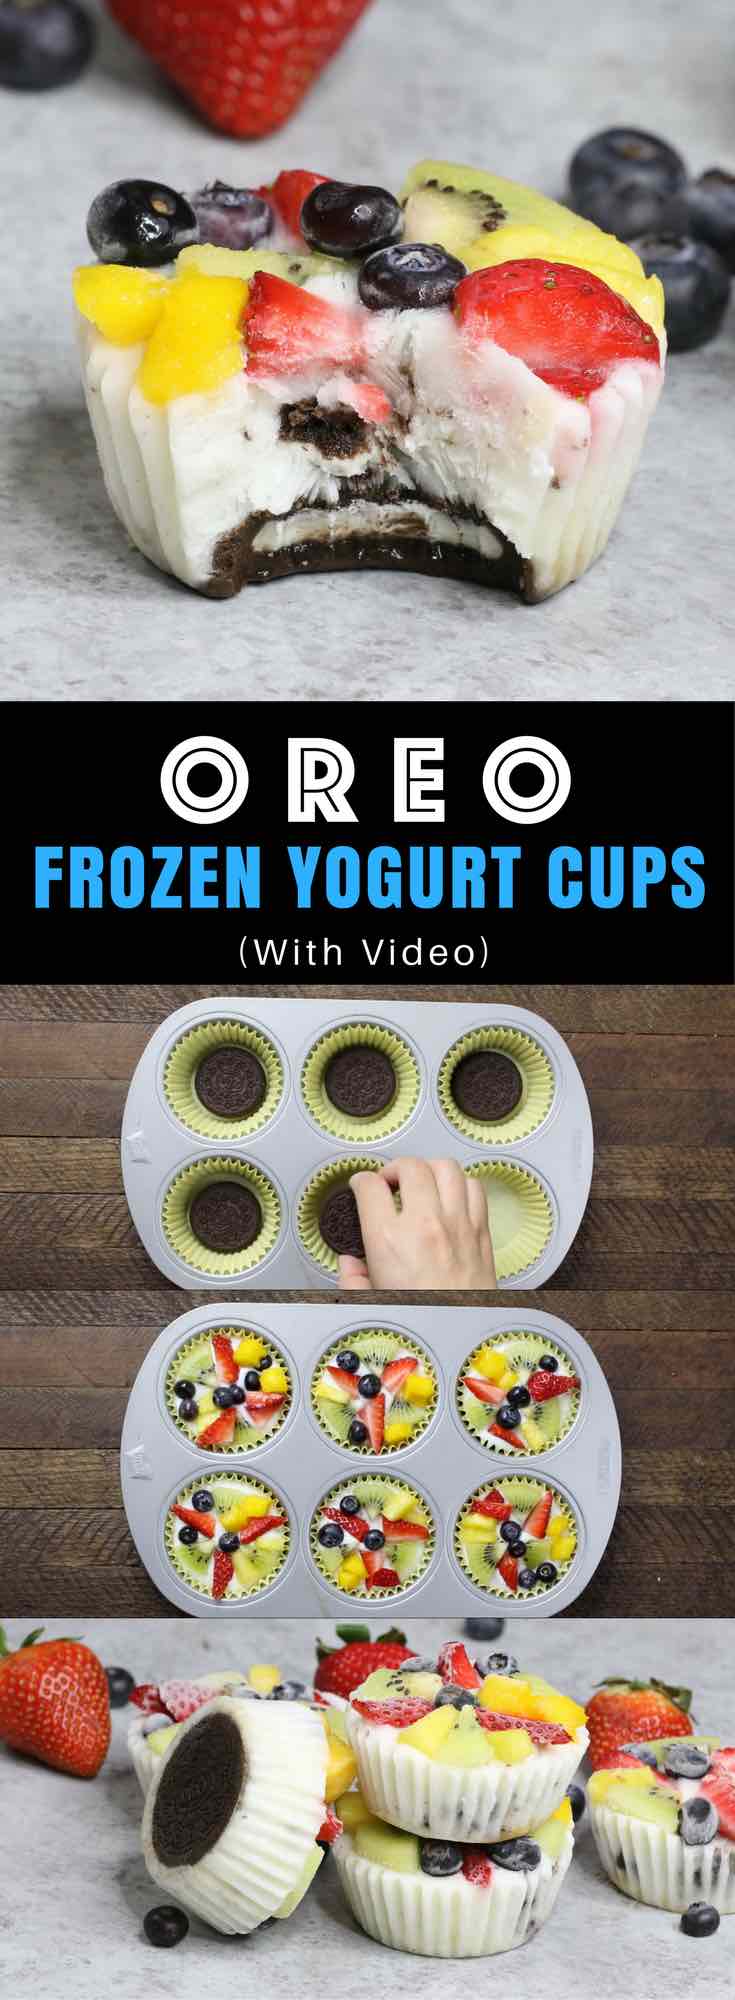 Oreo Frozen Yogurt Bites are delicious and healthy with cookies and cream flavors. These frozen treats are easy to make for backyard BBQs, kids birthday parties and more with no churning required! #oreofrozenyogurt